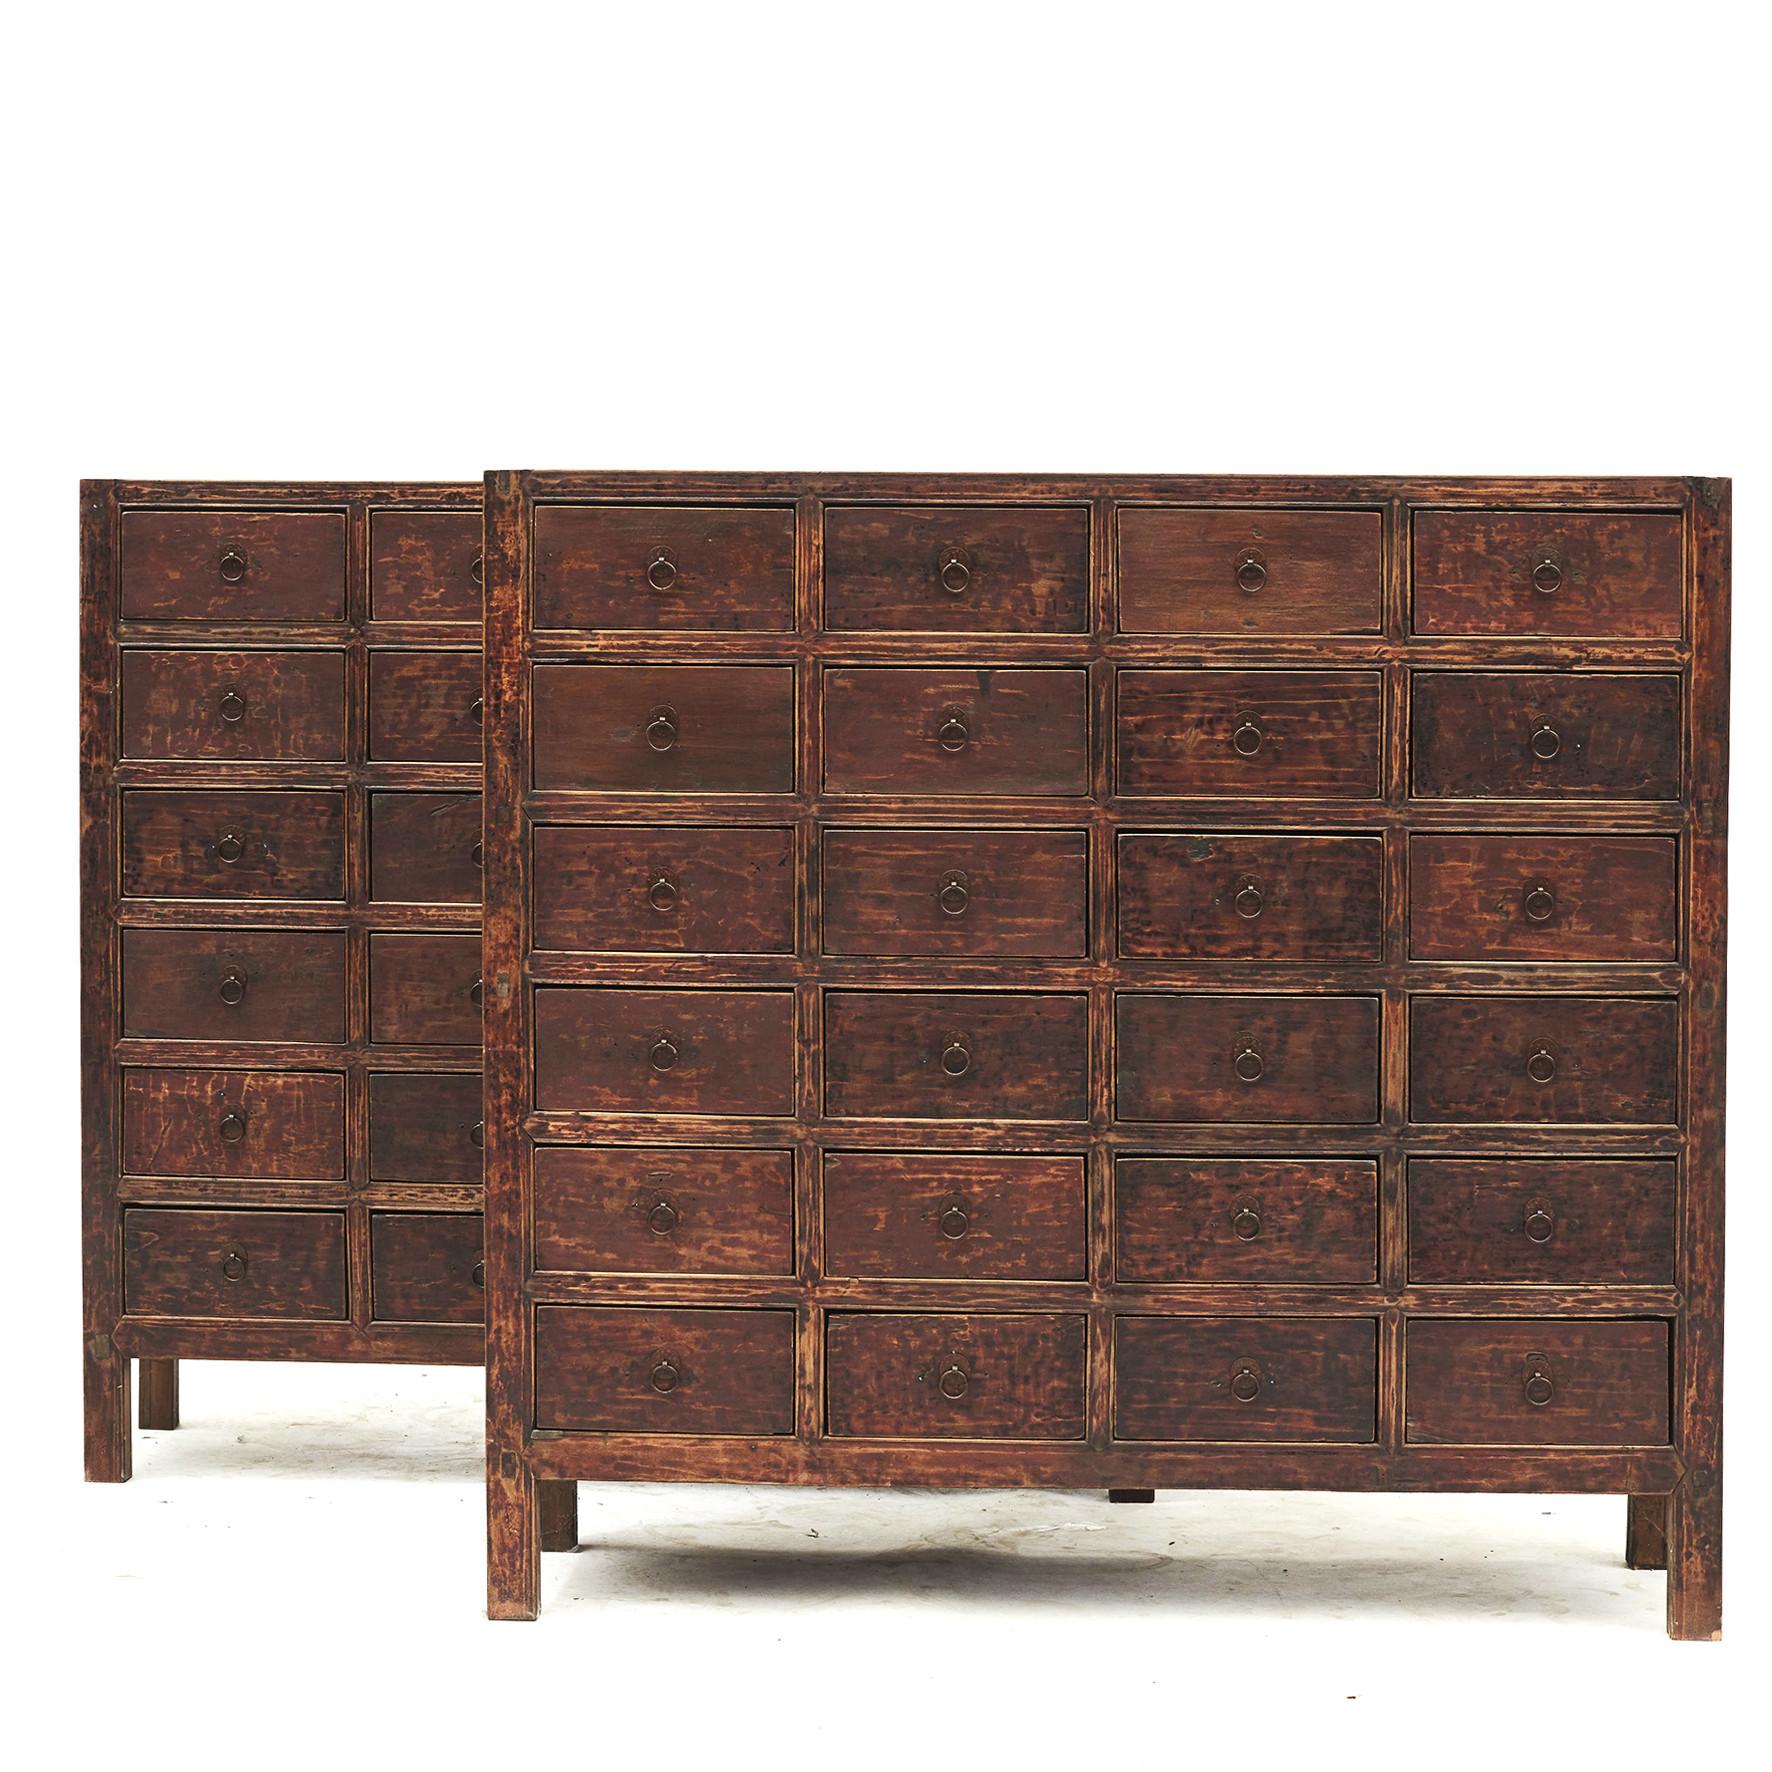 Chinese 19th Century Apothecary Medicine Chest with 24 Drawers